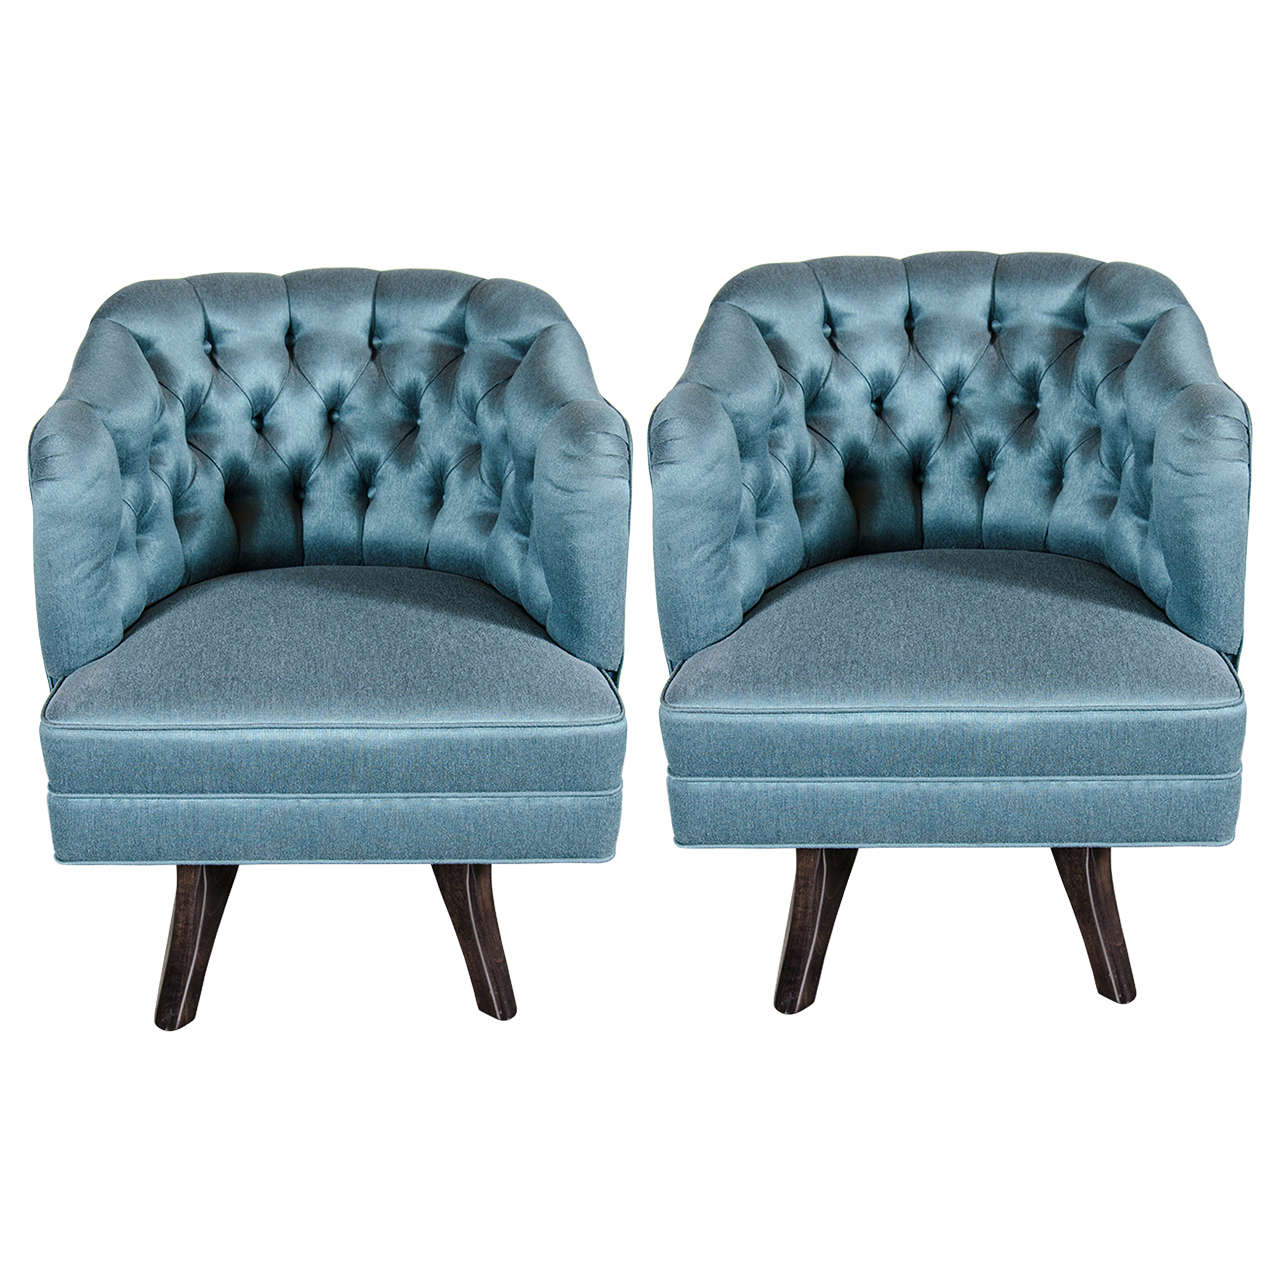 Pair of Mid-Century Modernist Tufted Back Swivel Chairs in Teal Upholstery